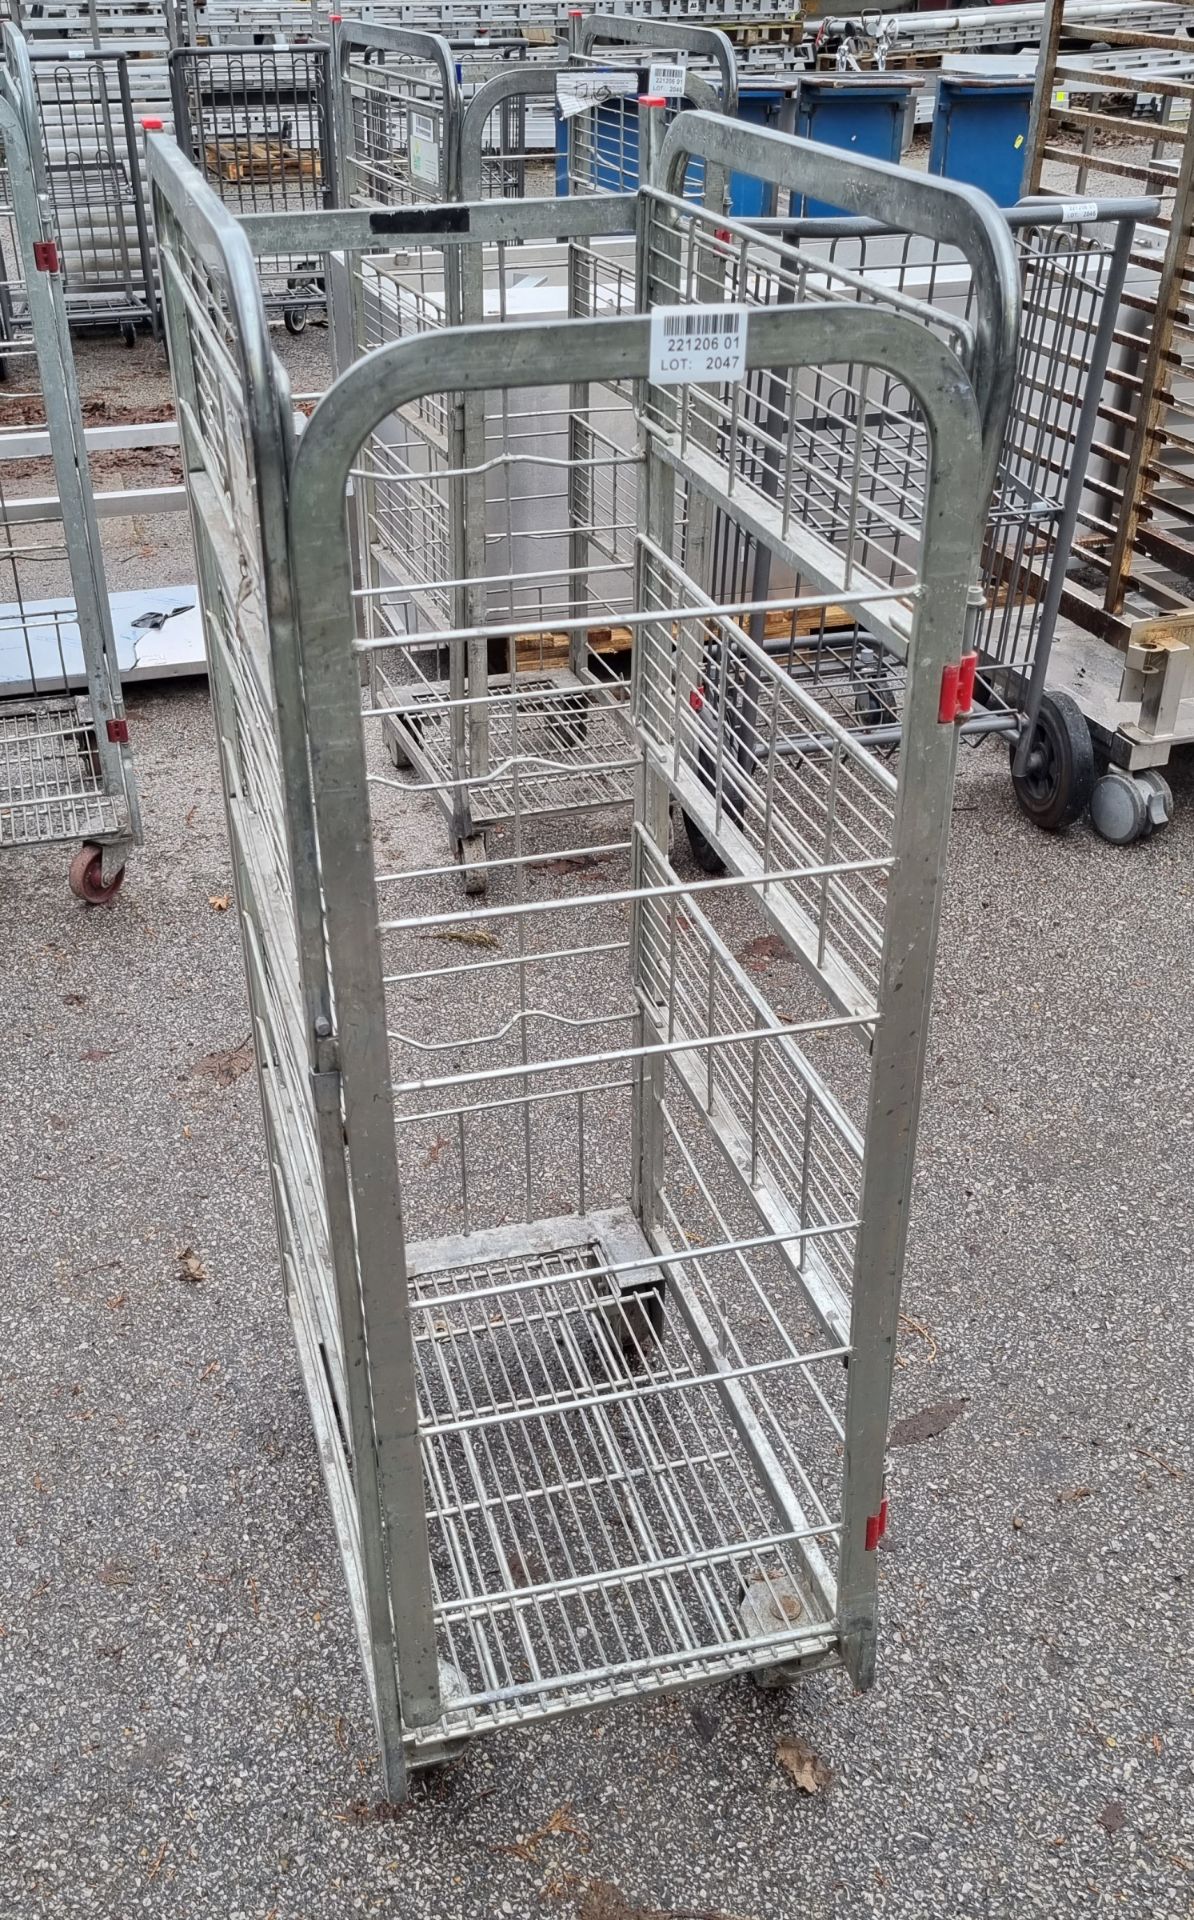 4 sided roll cage milk trolley - 45x65x125cm - Image 2 of 2